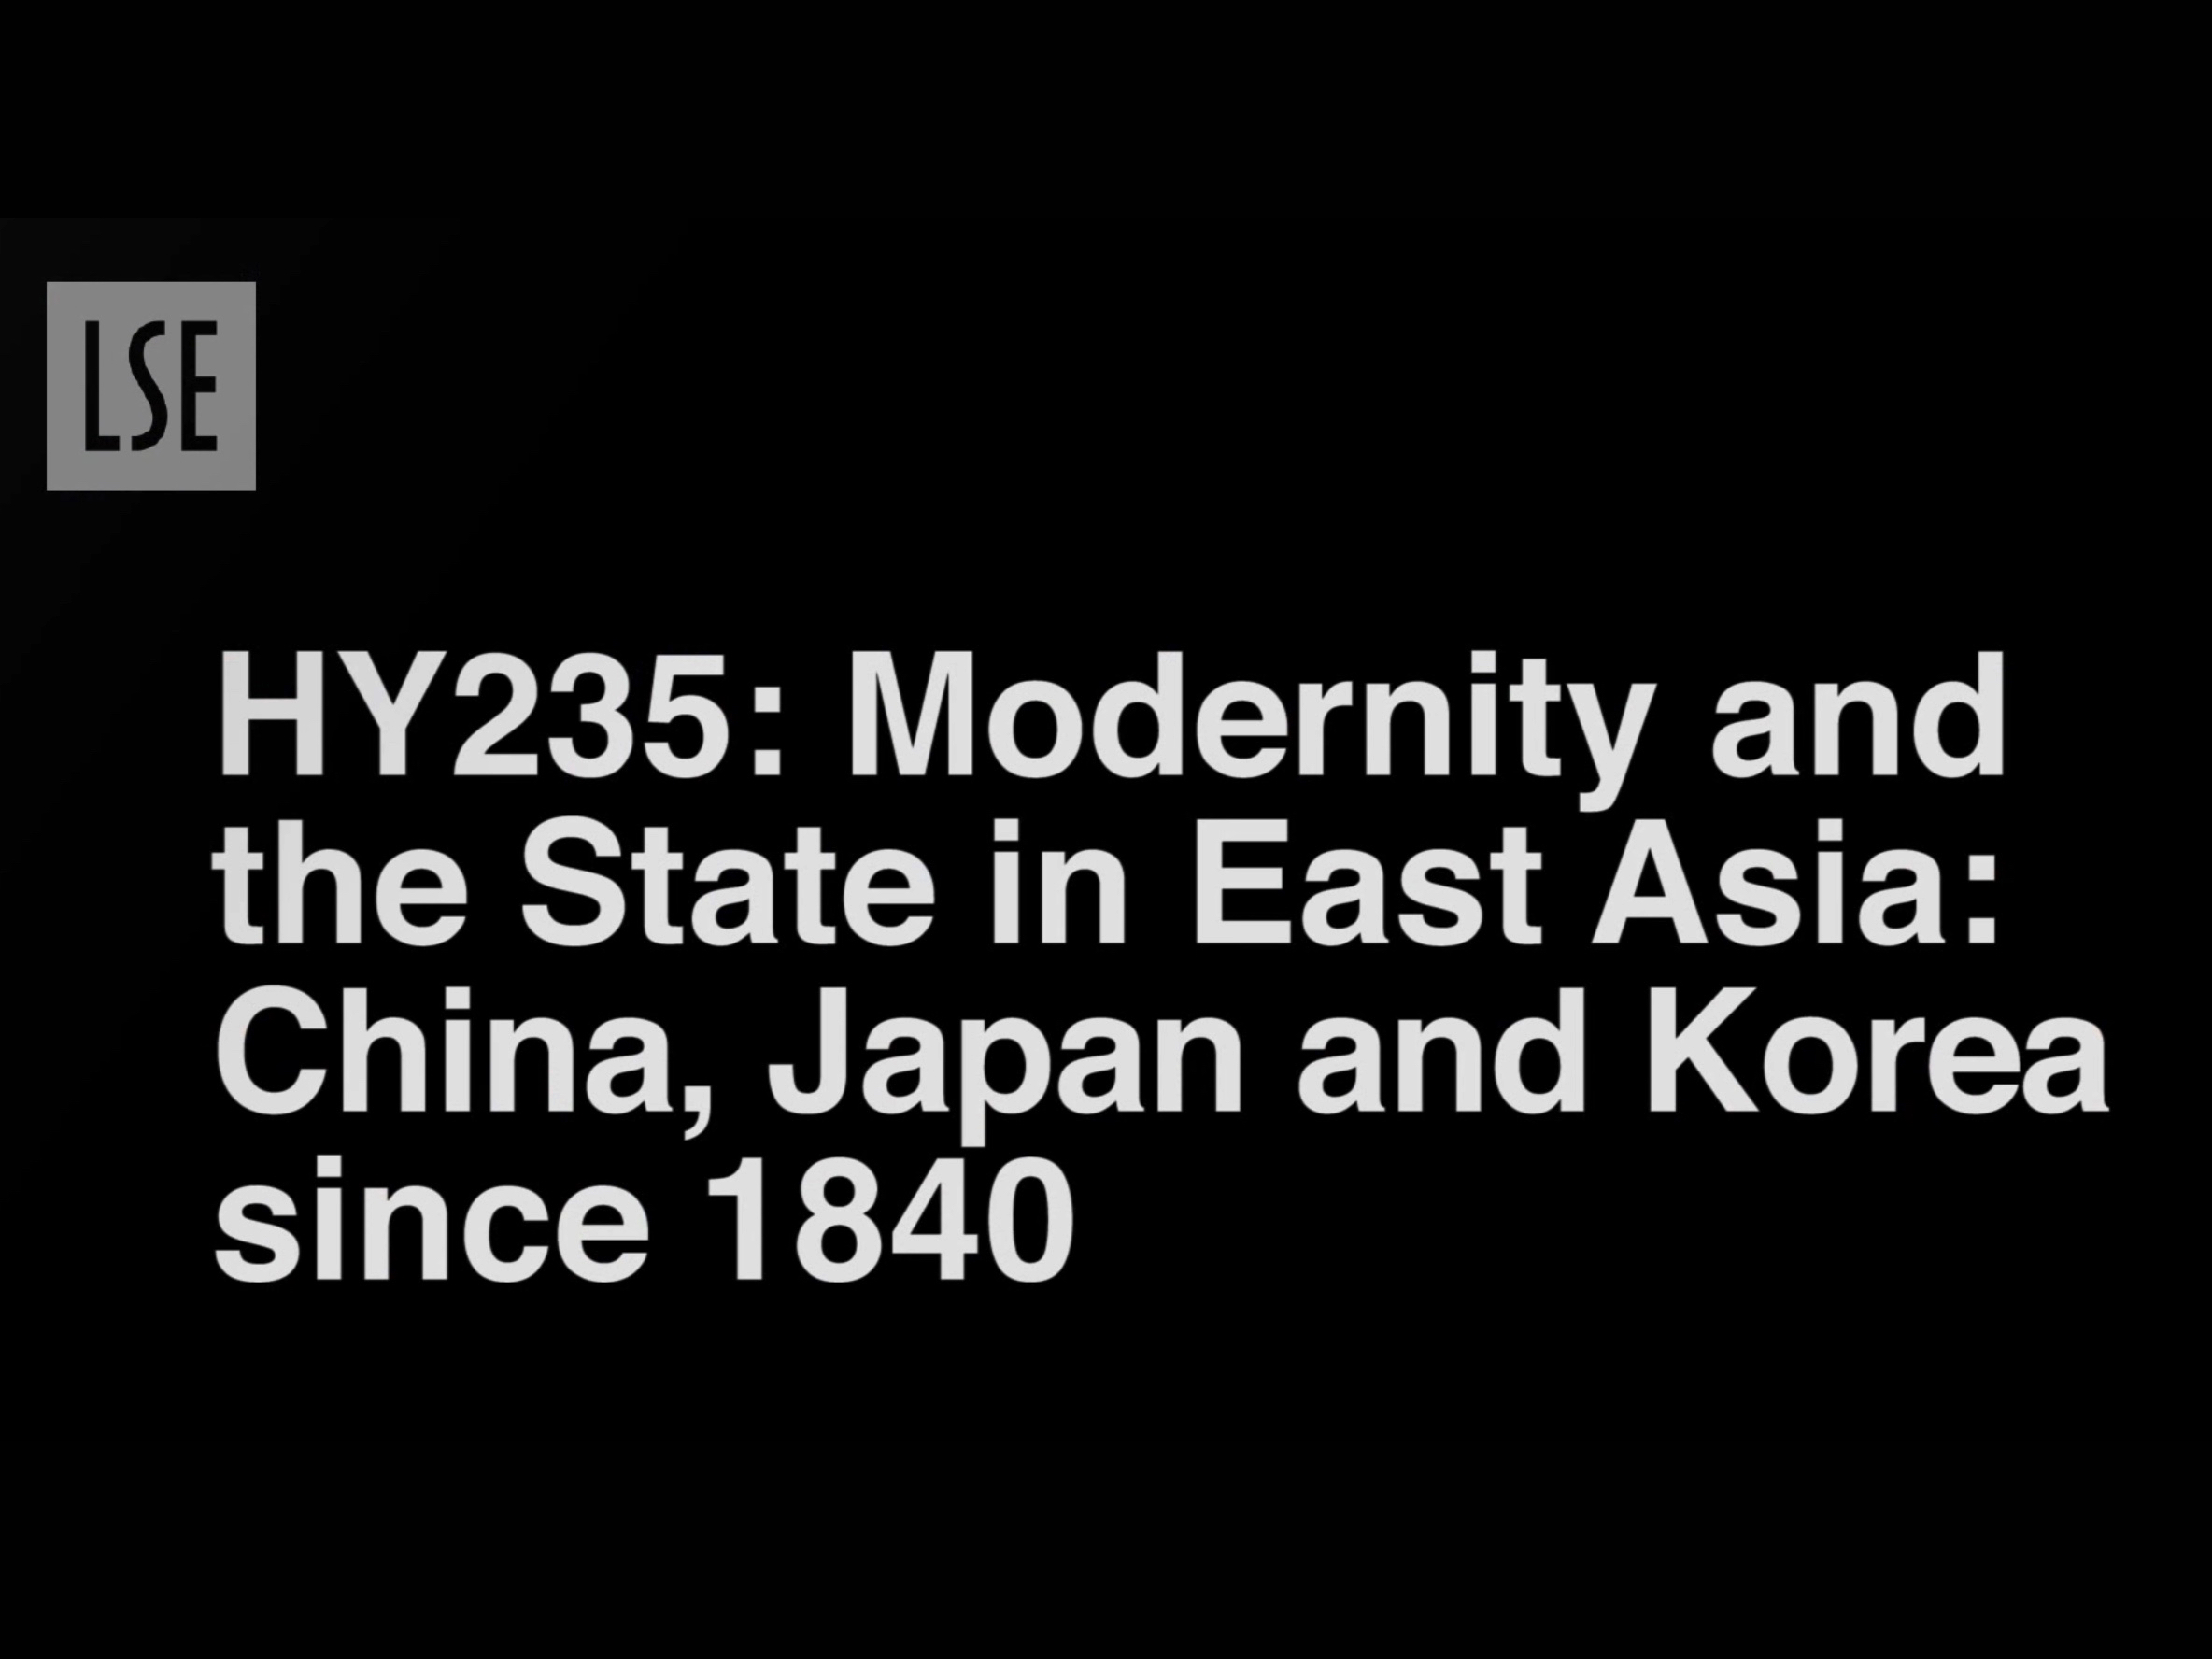 HY235: Modernity and the State in East Asia: China, Japan and Korea since 1840